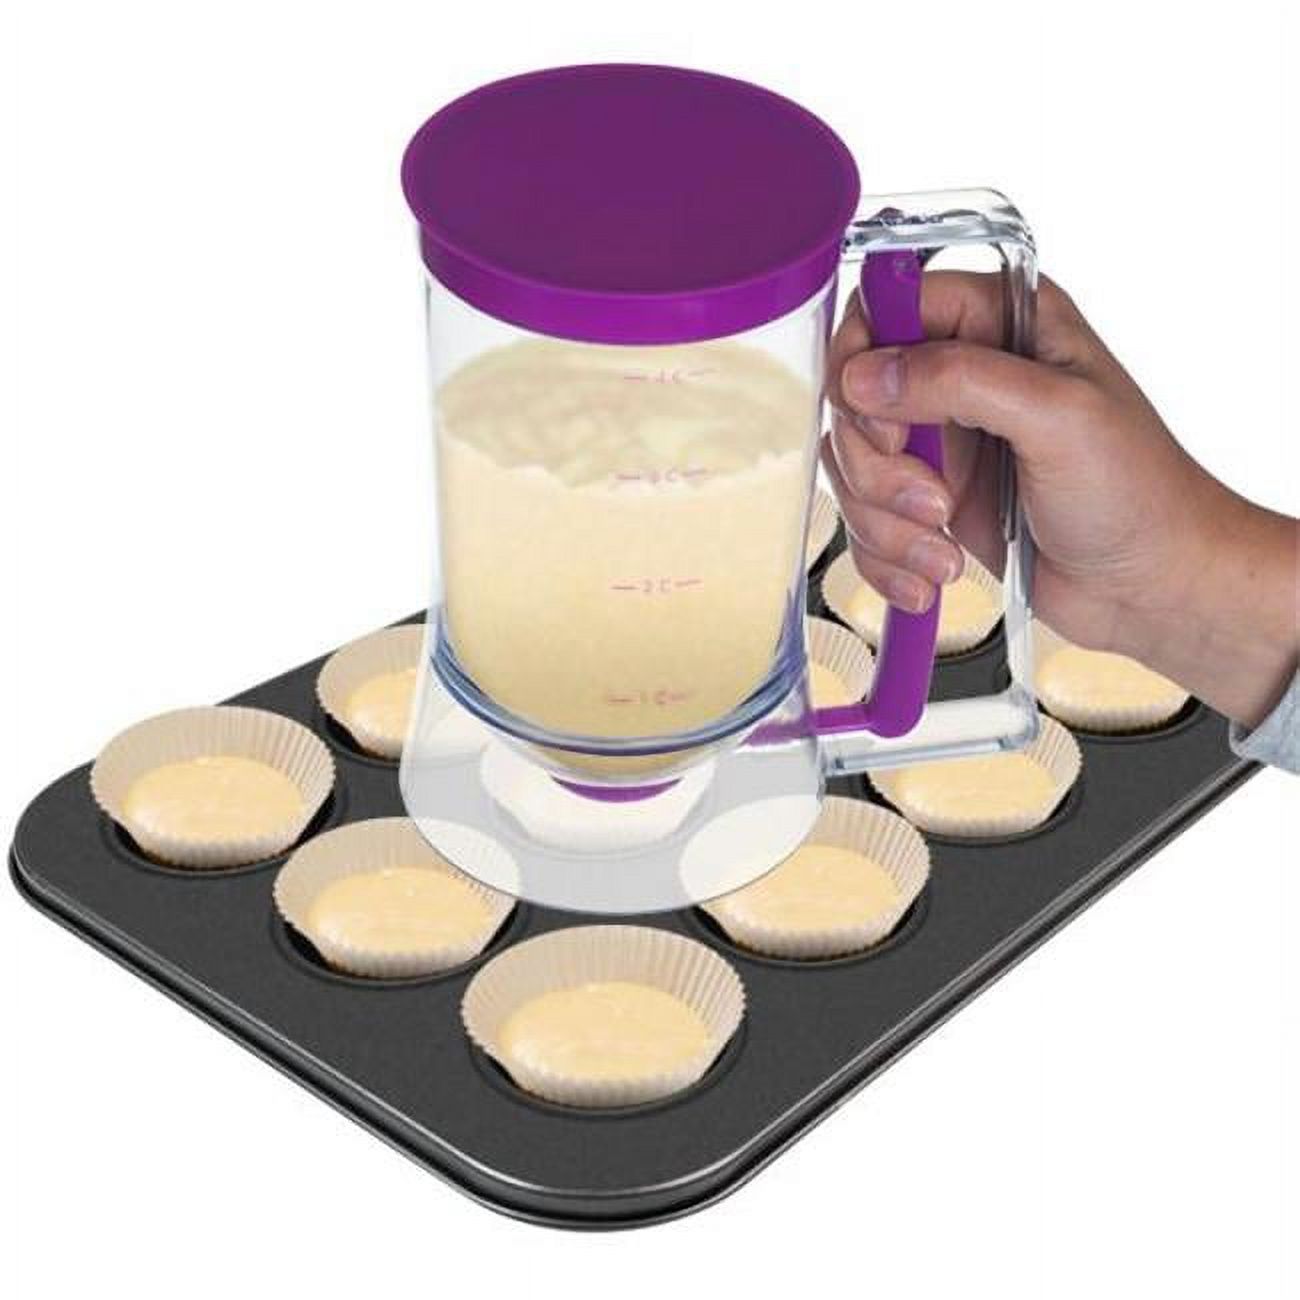 Chef Buddy Batter Dispenser, 4-Cup, Purple, Durable Plastic - image 1 of 6